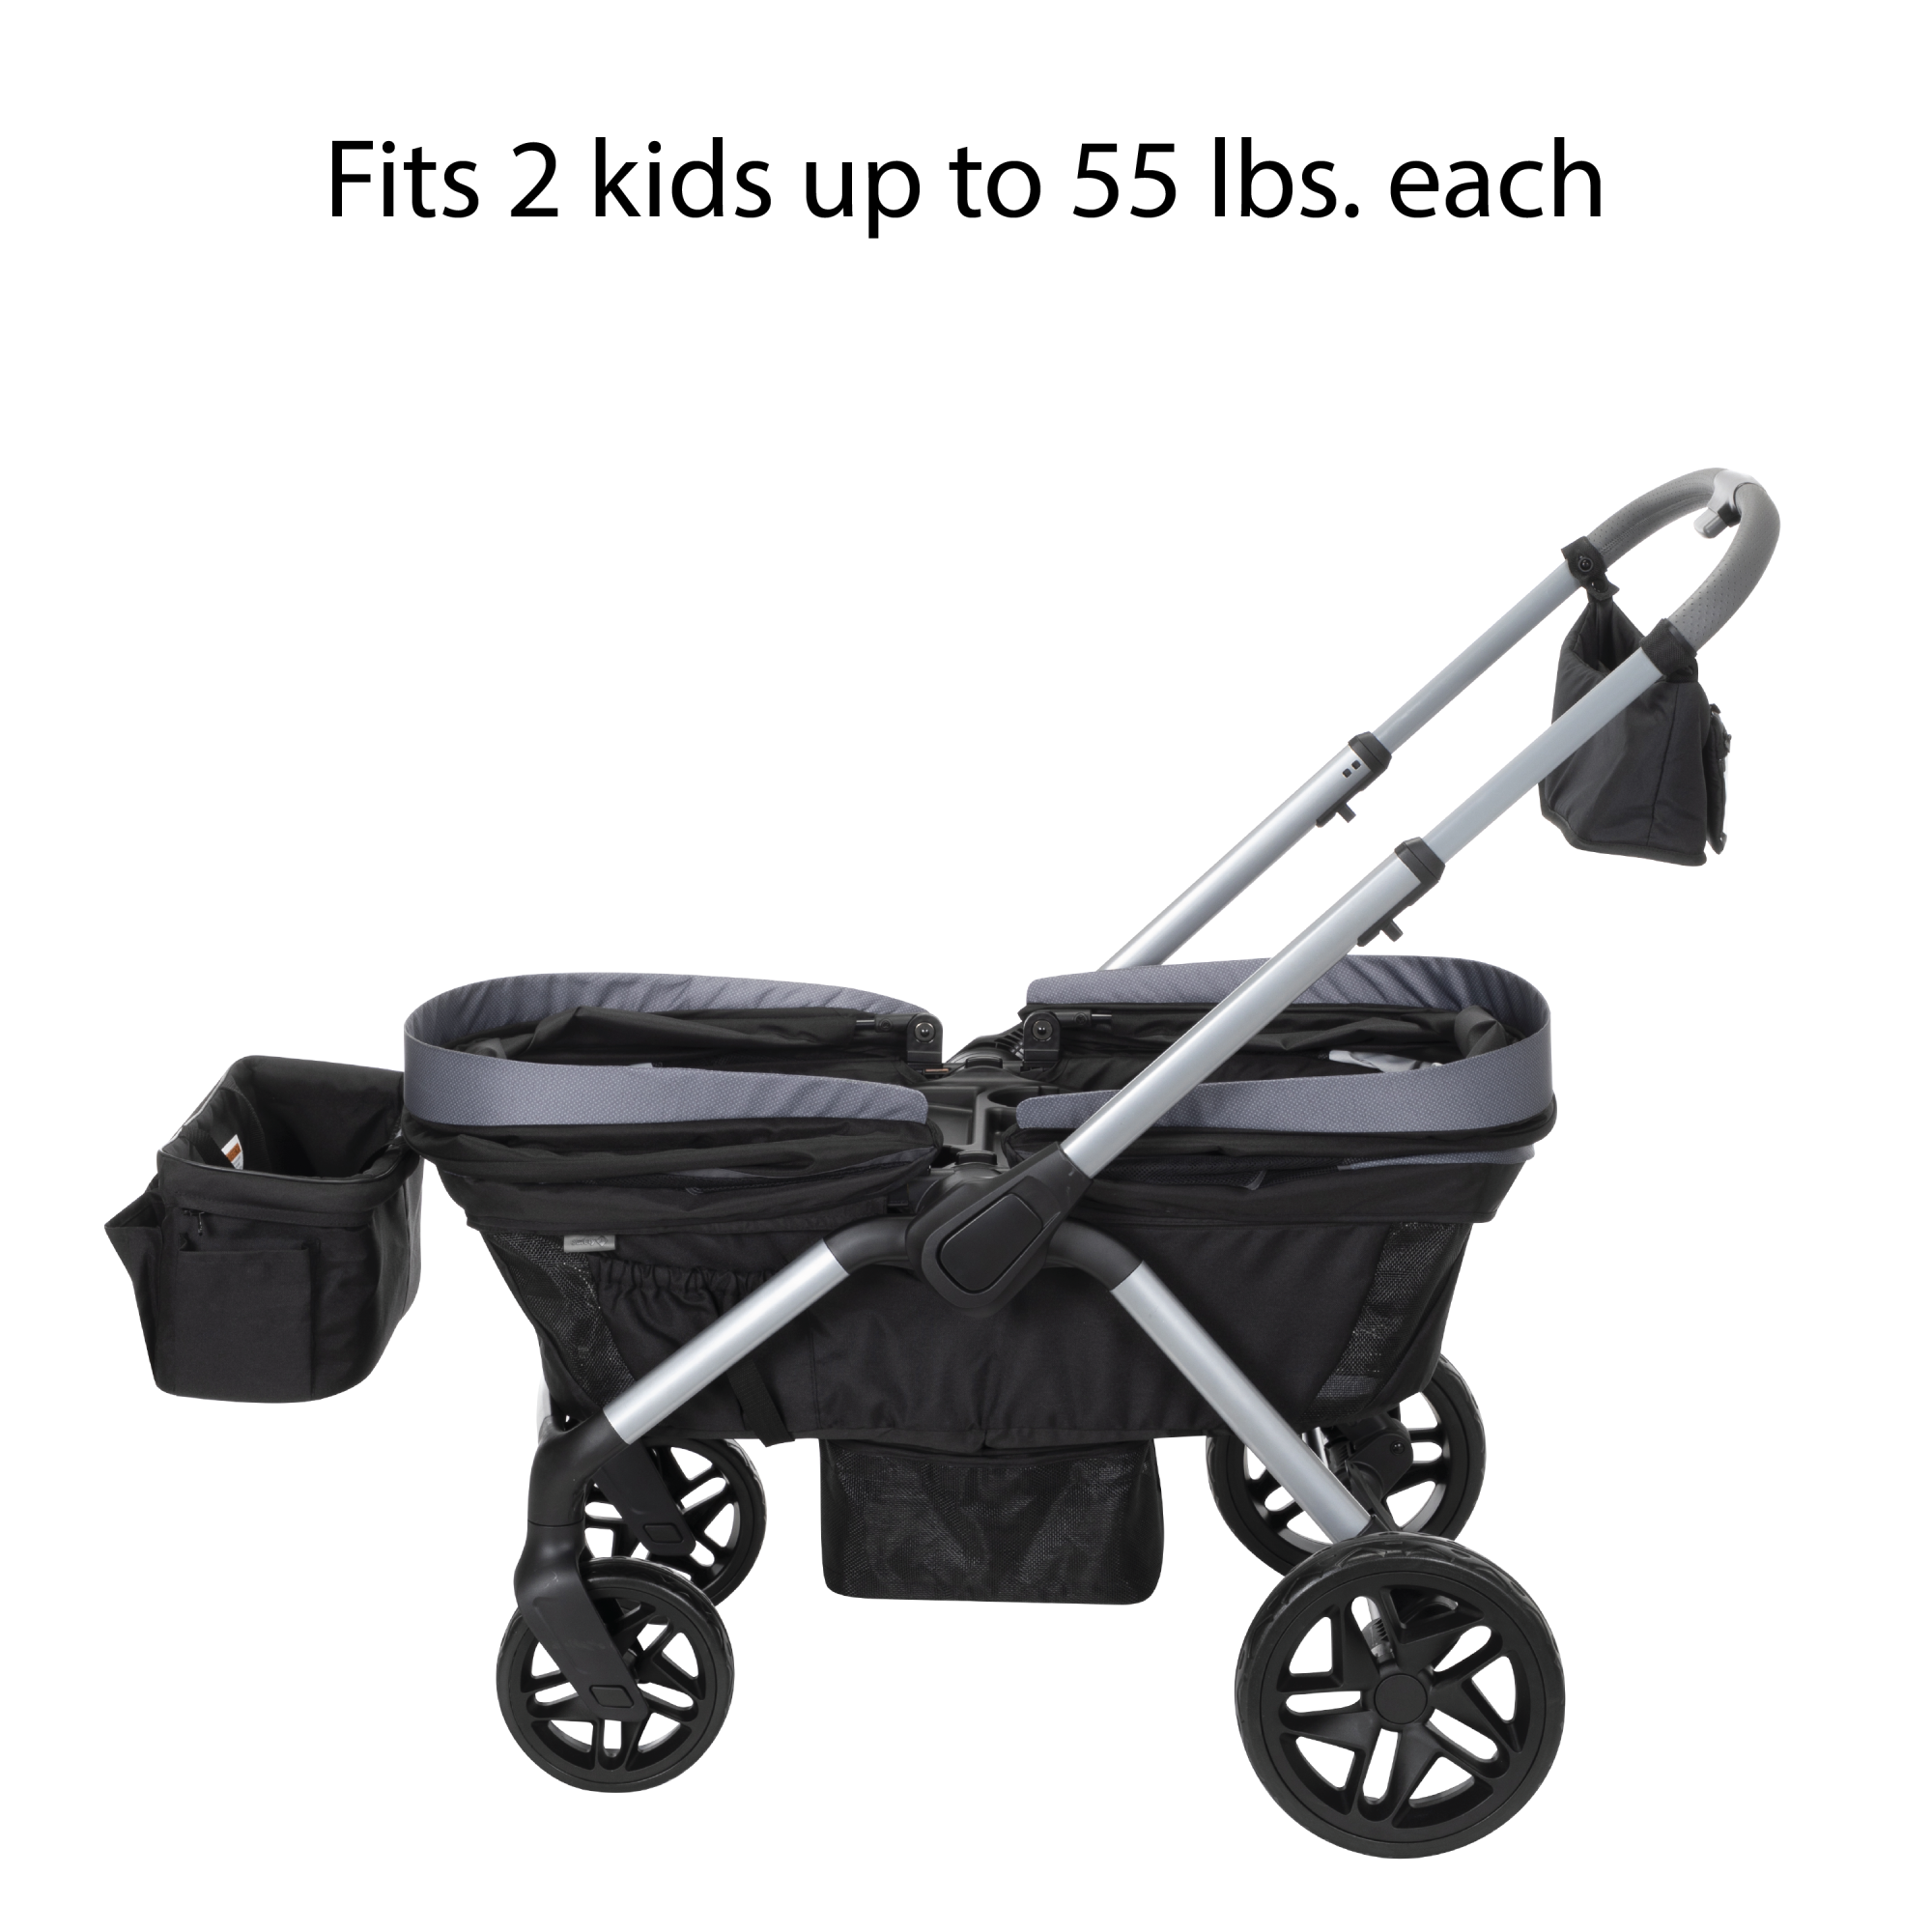 Summit Wagon Stroller - all-terrain wheels with rear suspension and linked braking system